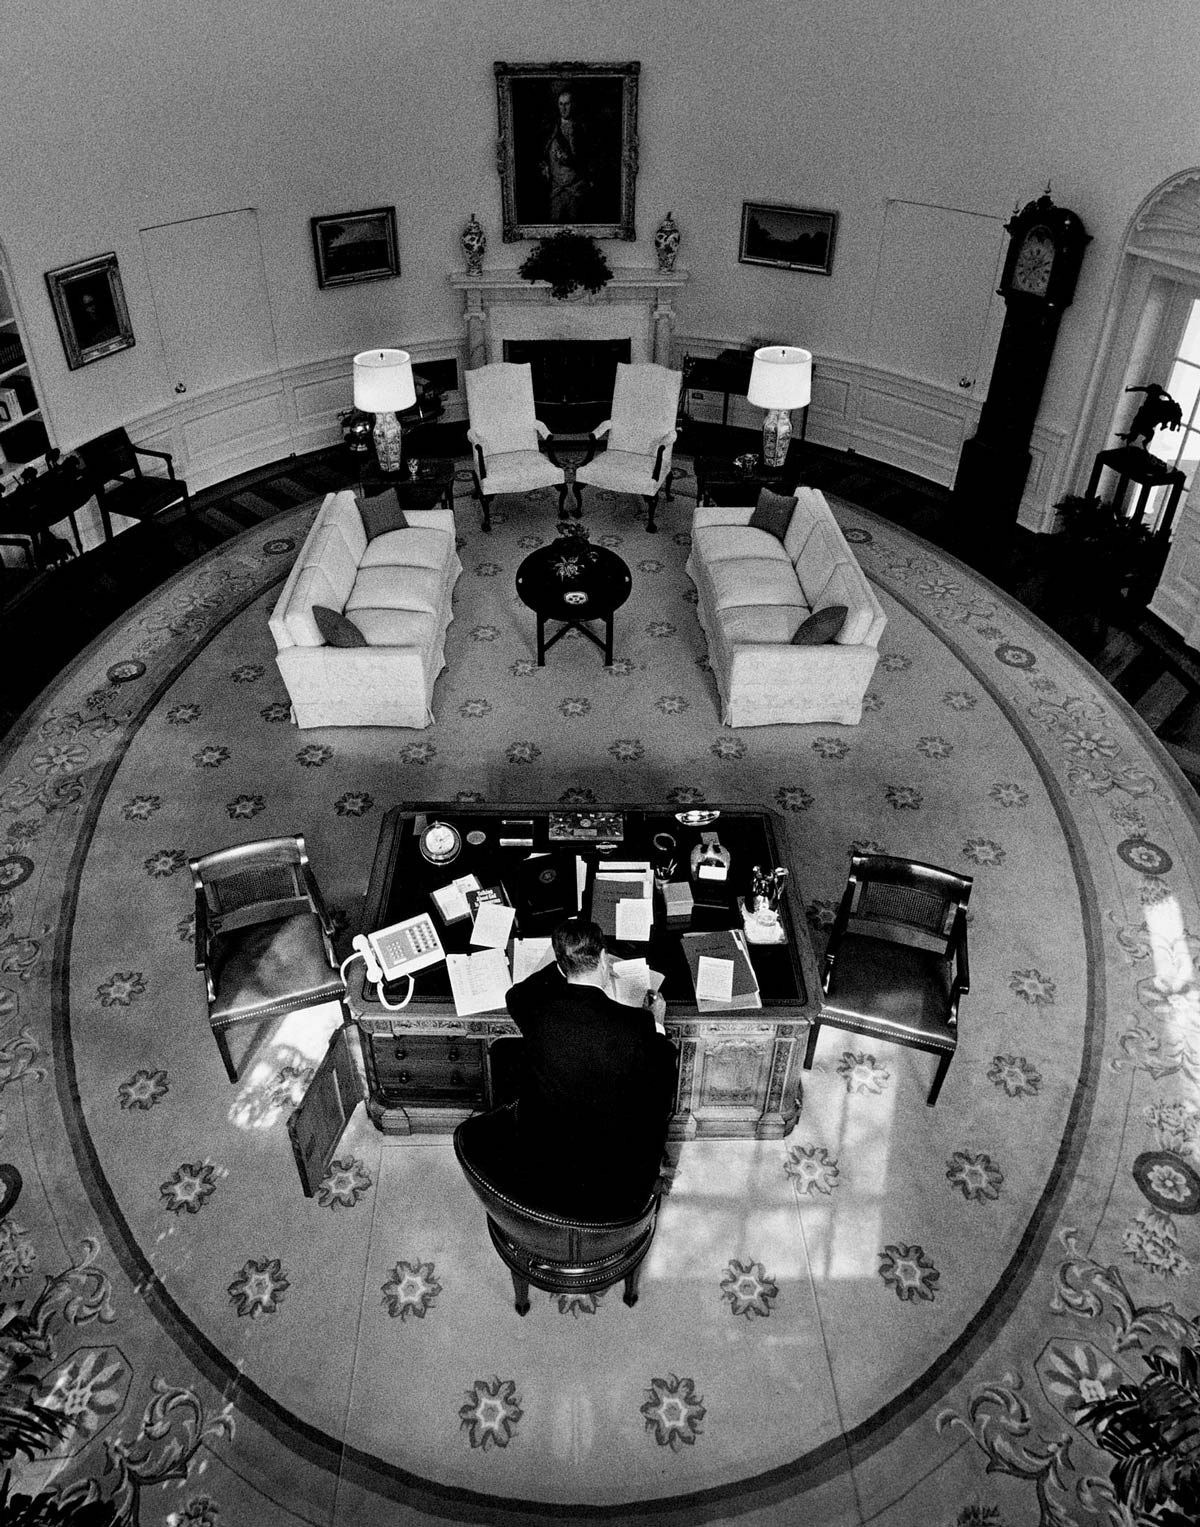 Aerial view of the Reagan Pete Souza at a desk